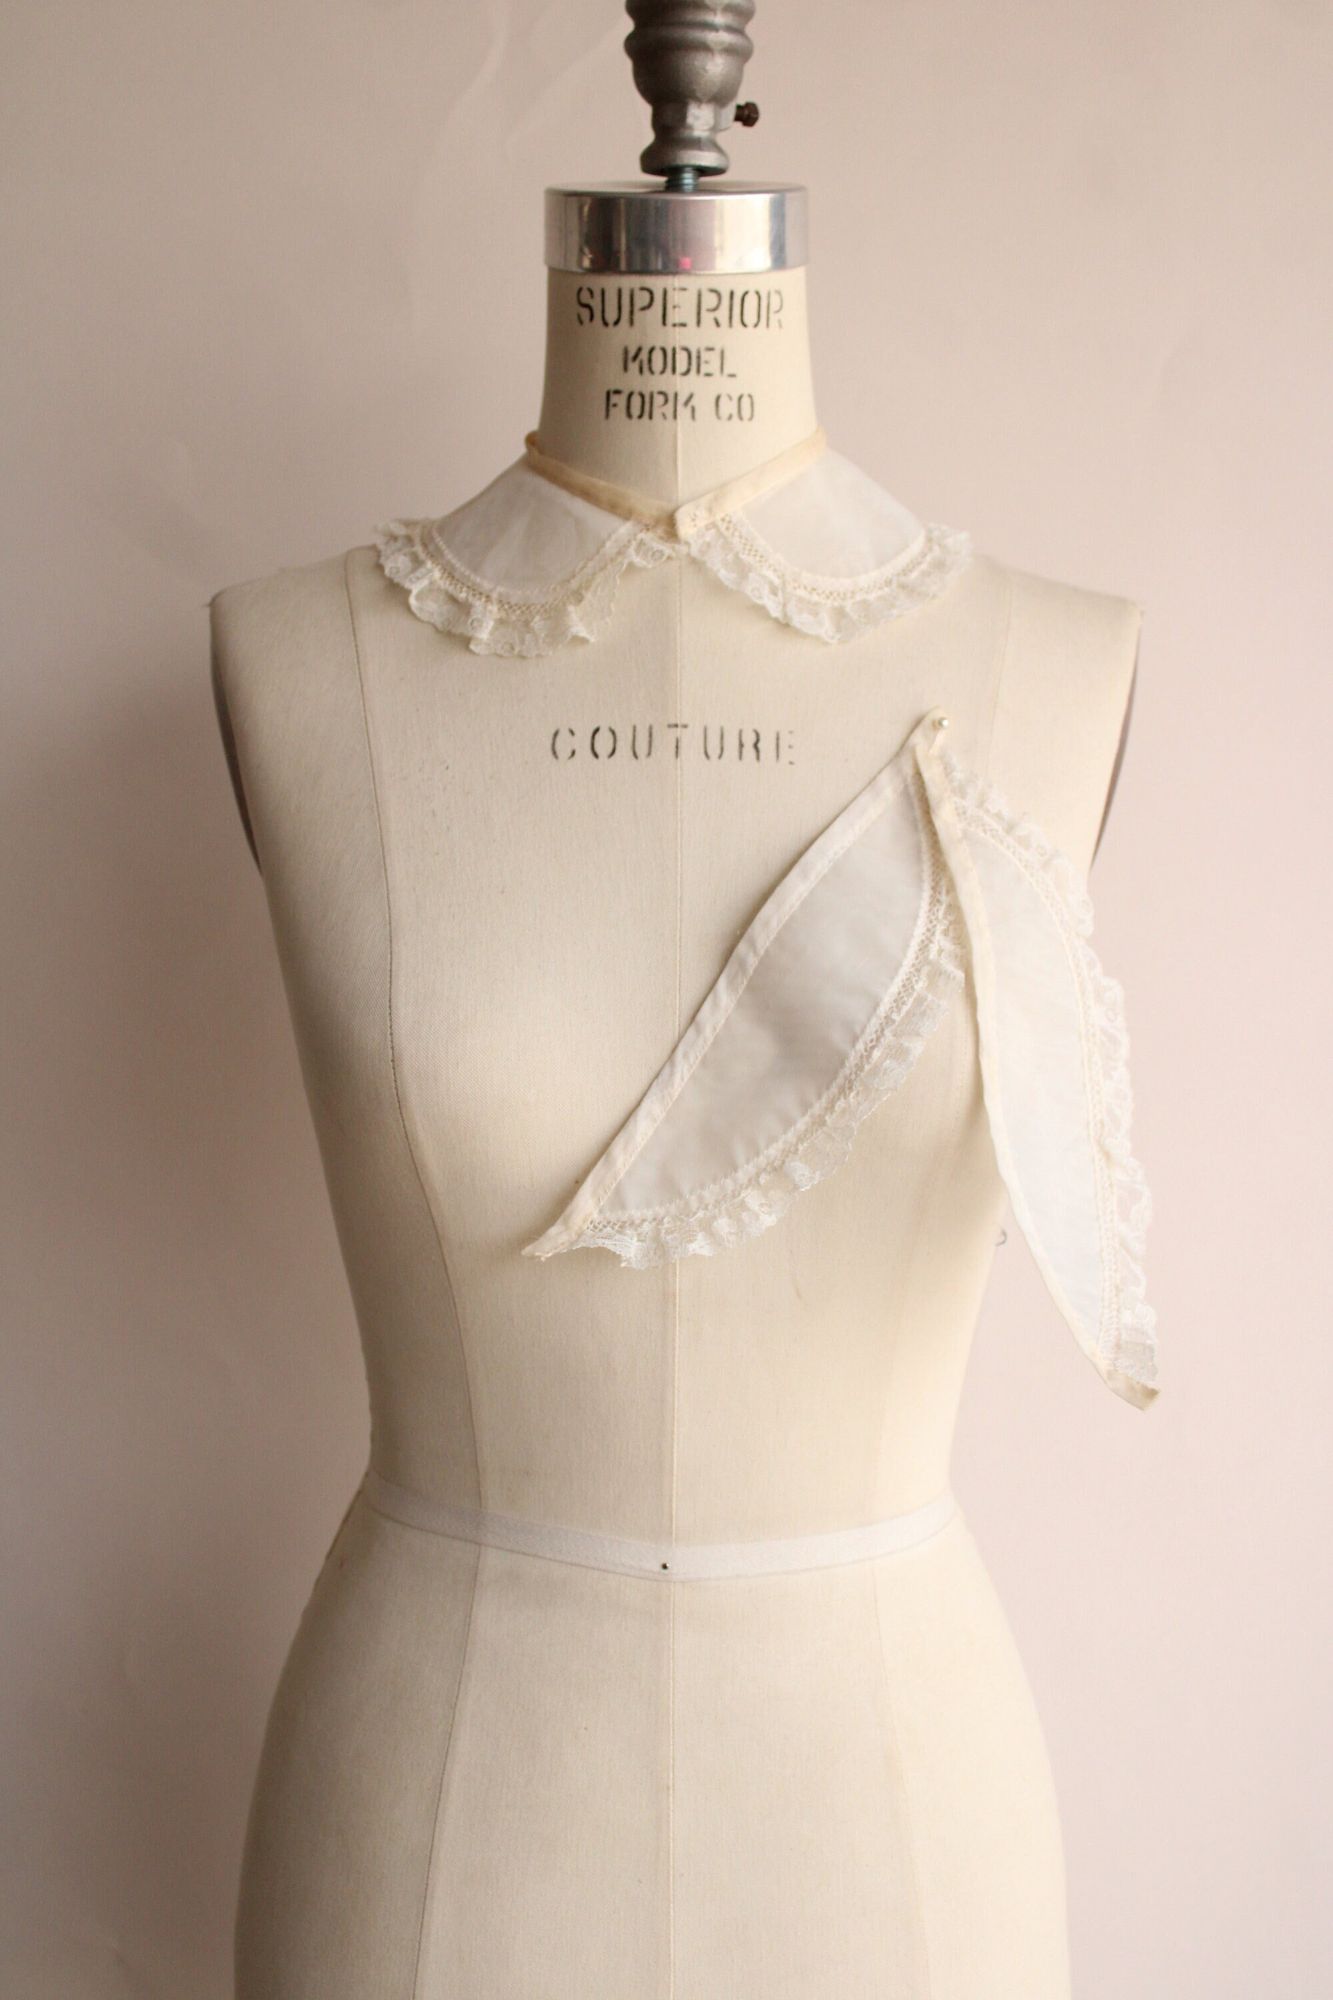 Vintage 1940s Collar and Cuffs